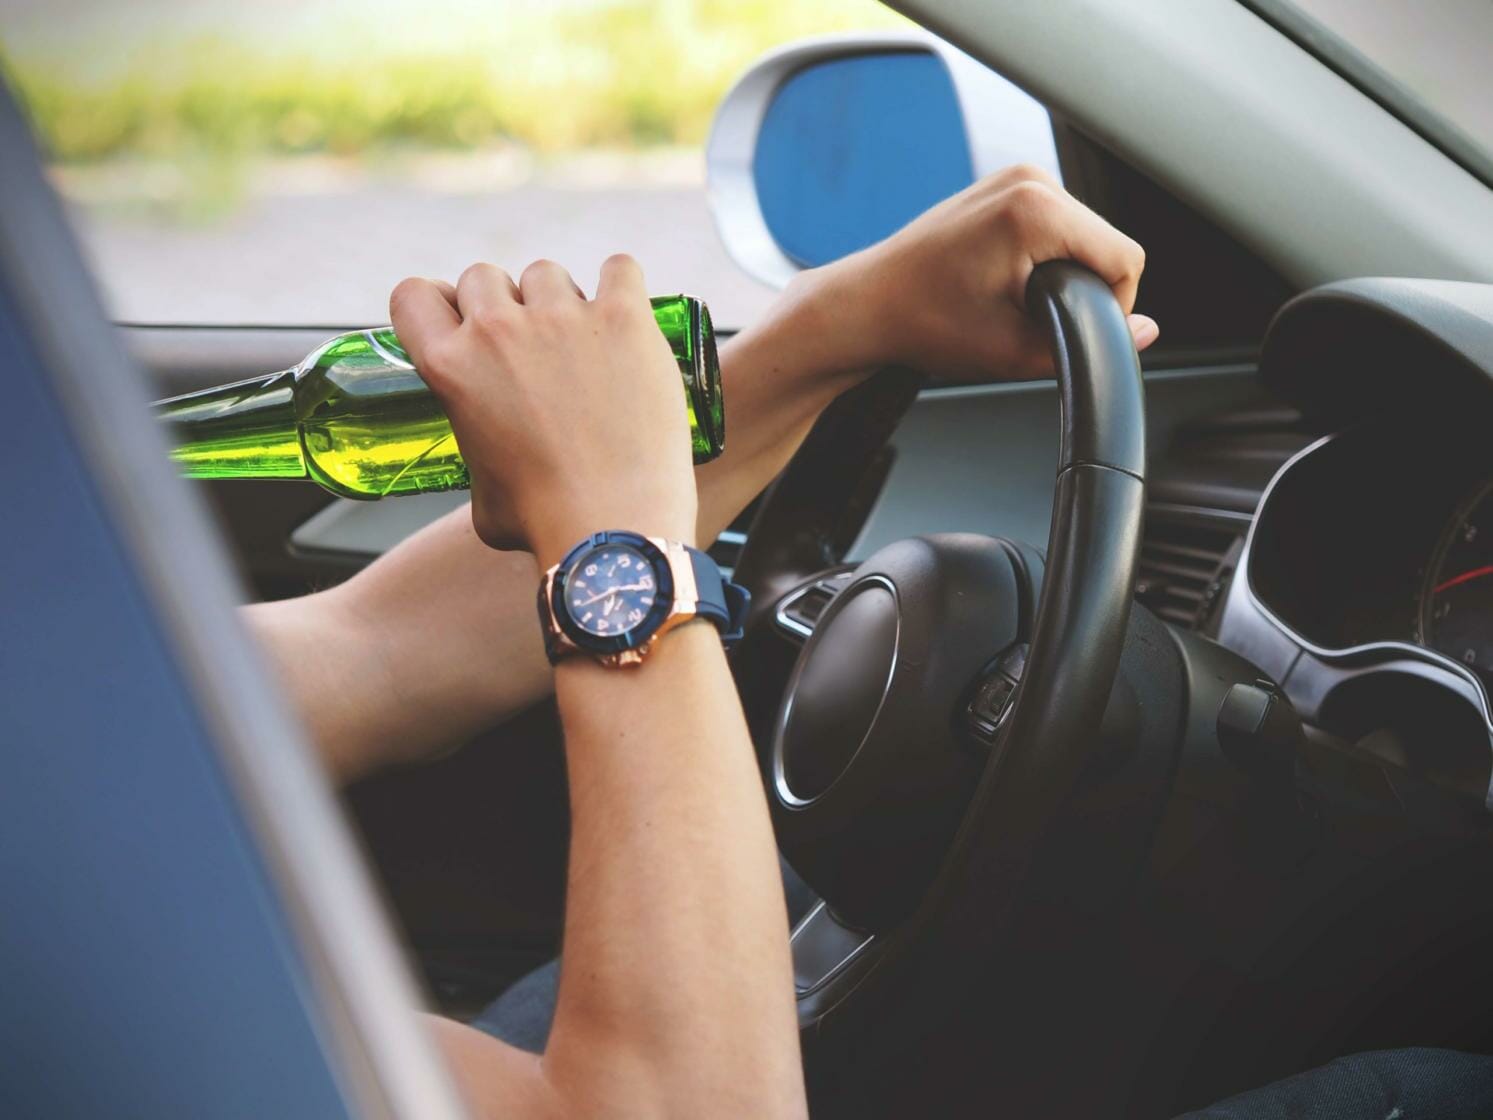 Man sipping a bottle of beer while driving